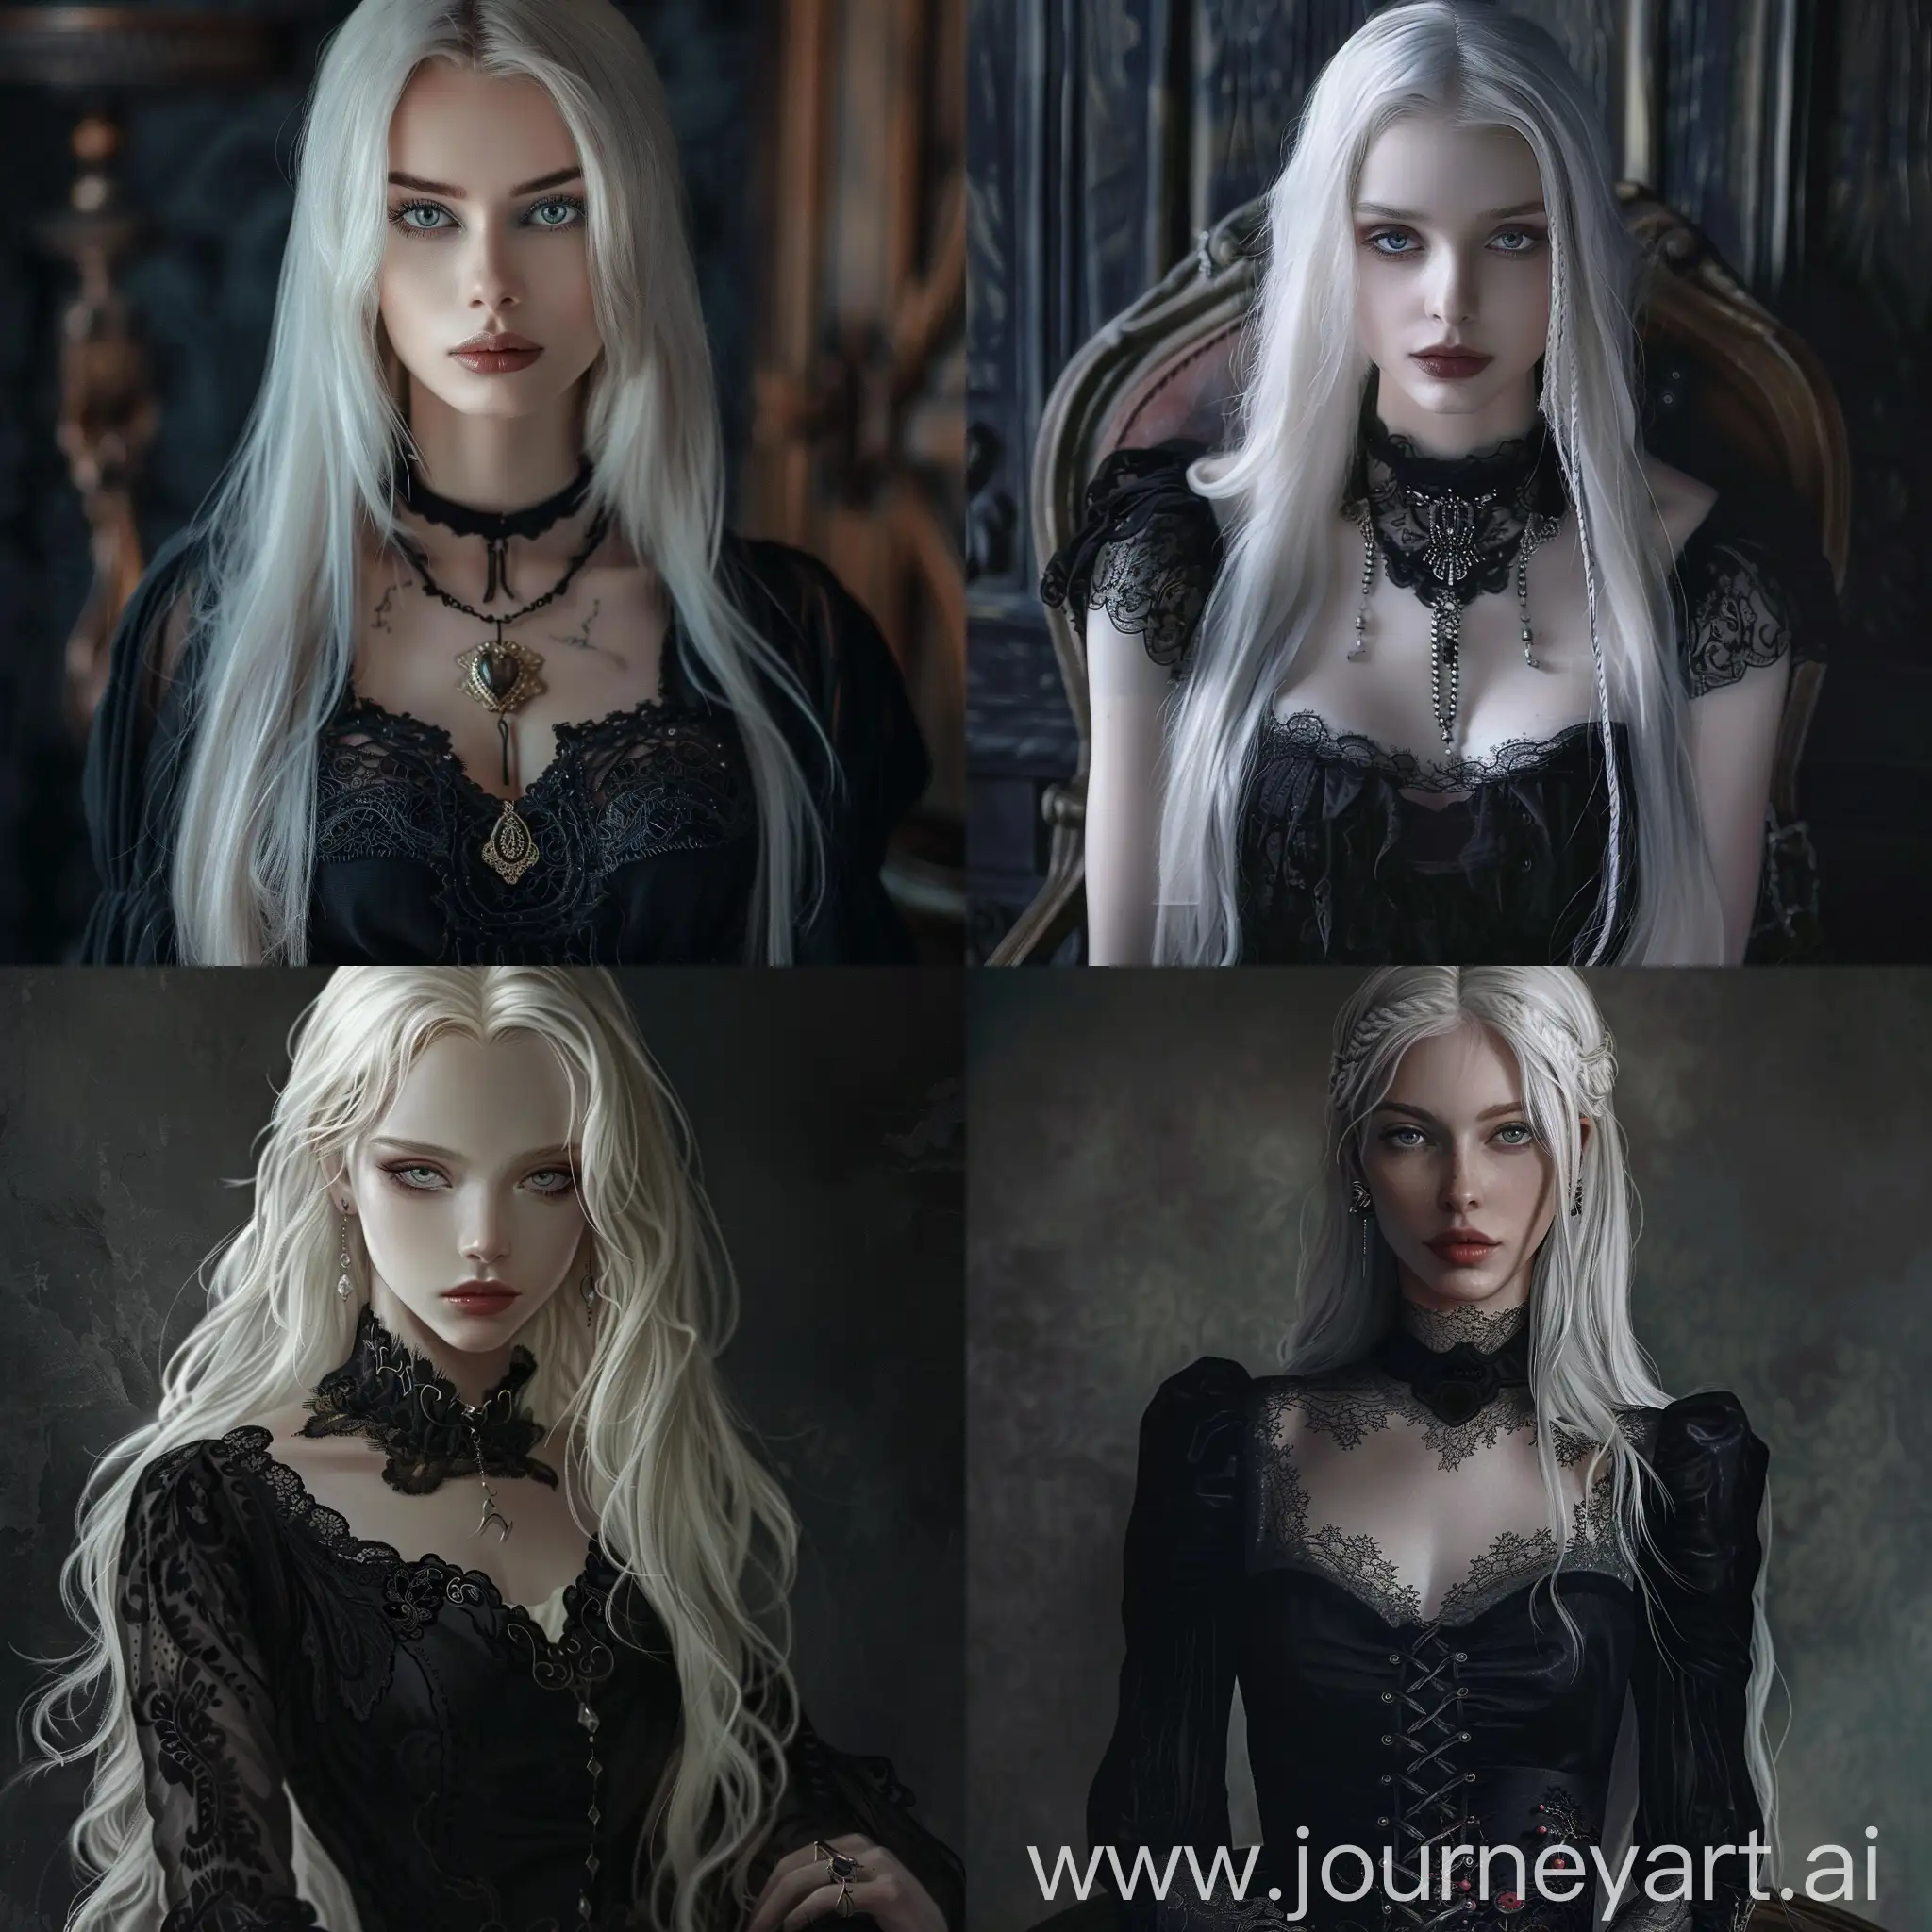 Young-Woman-with-Indigo-Eyes-and-White-Hair-in-Elegant-Black-Dress